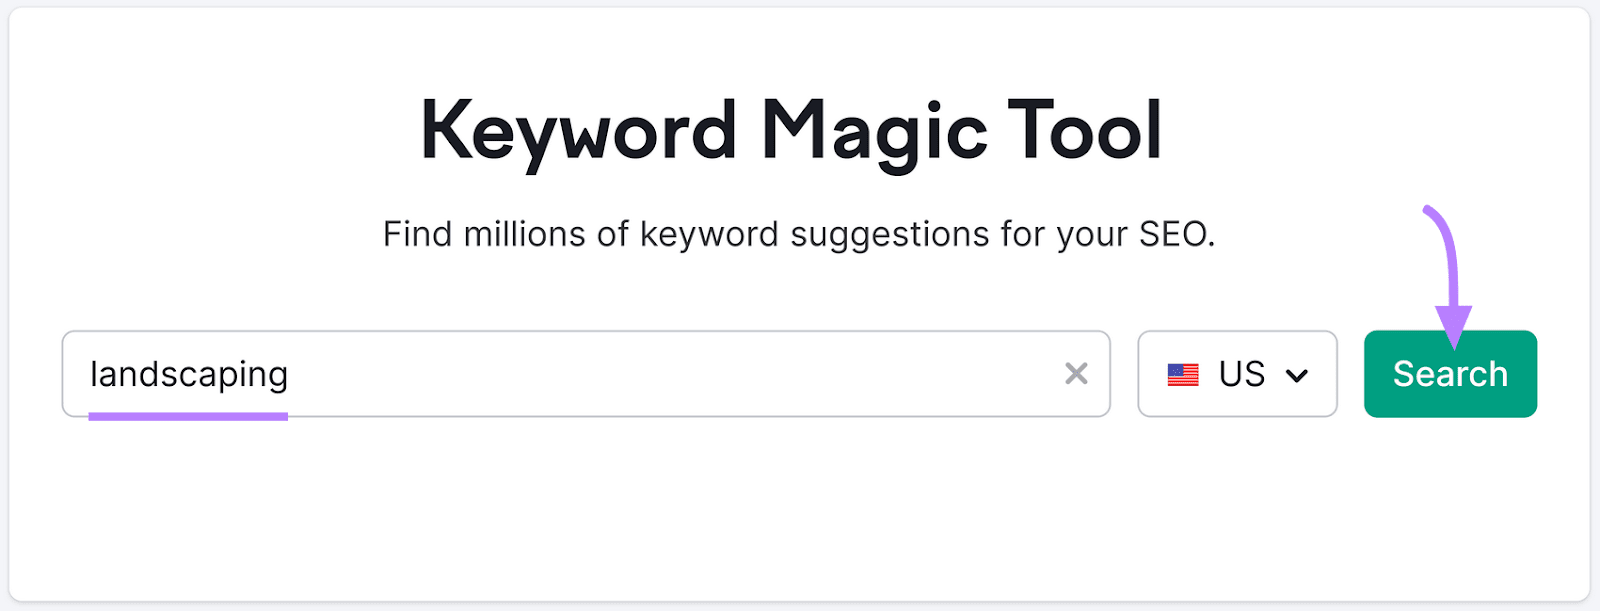 "landscaping" entered into the Keyword Magic Tool search bar